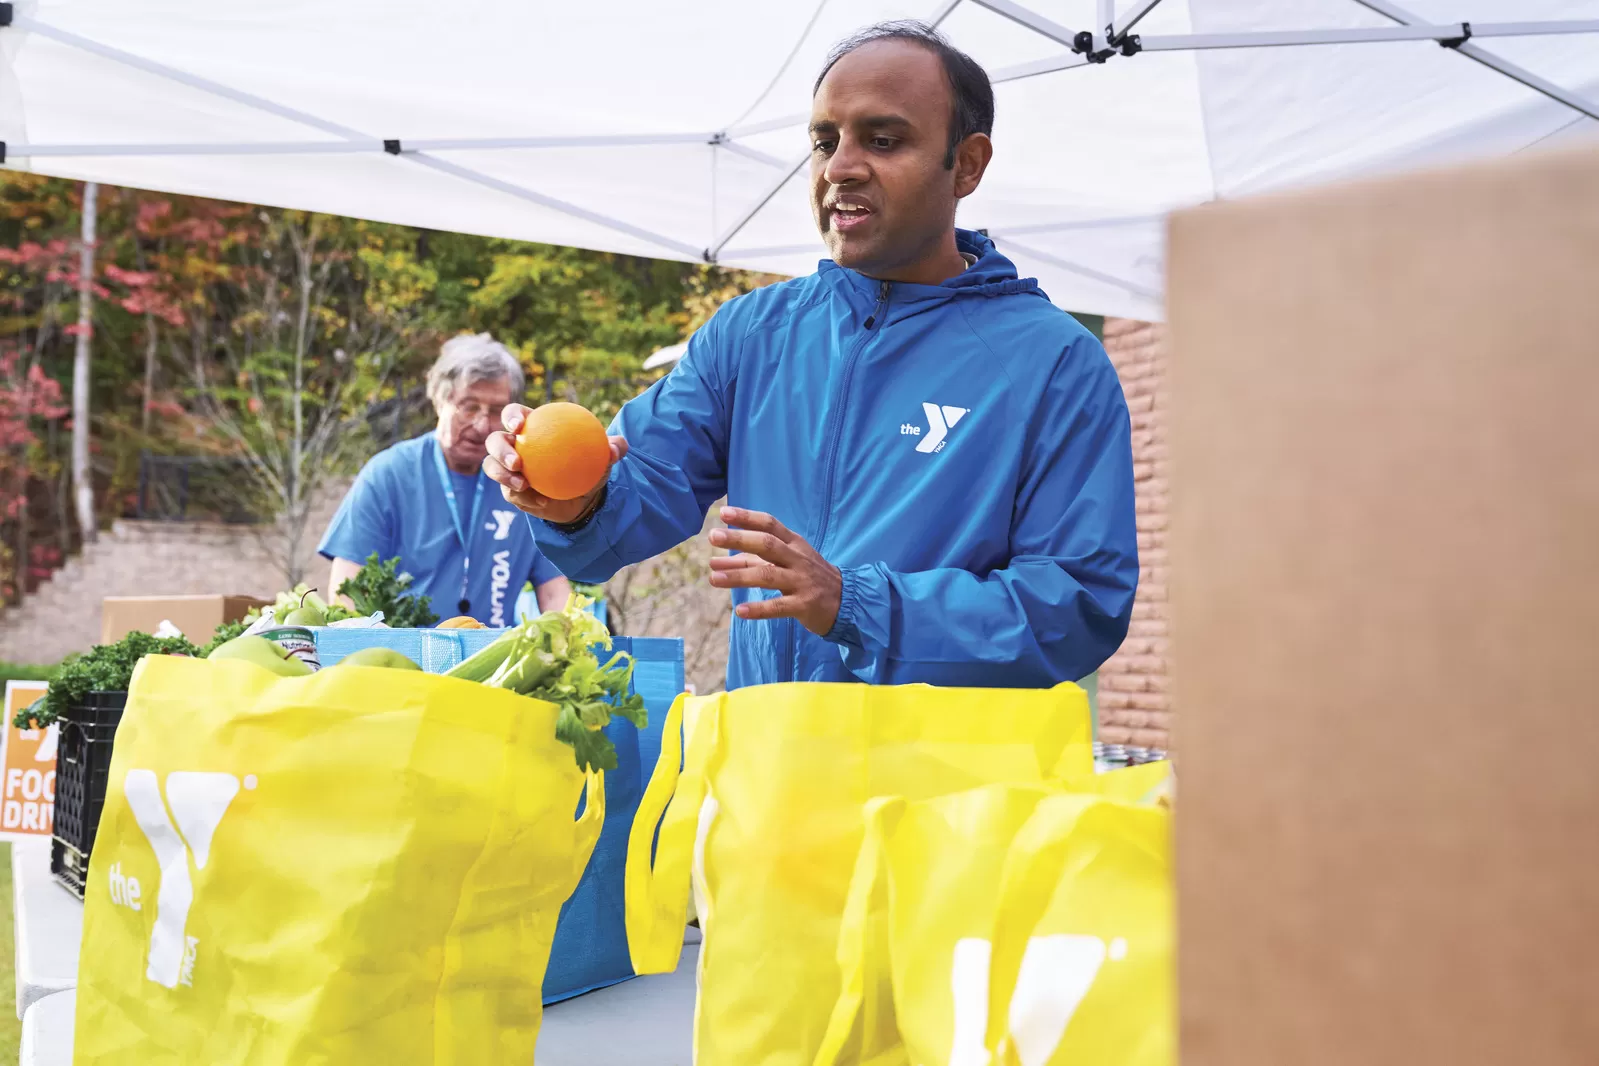 A man places an orange into a ymca grocery bag.